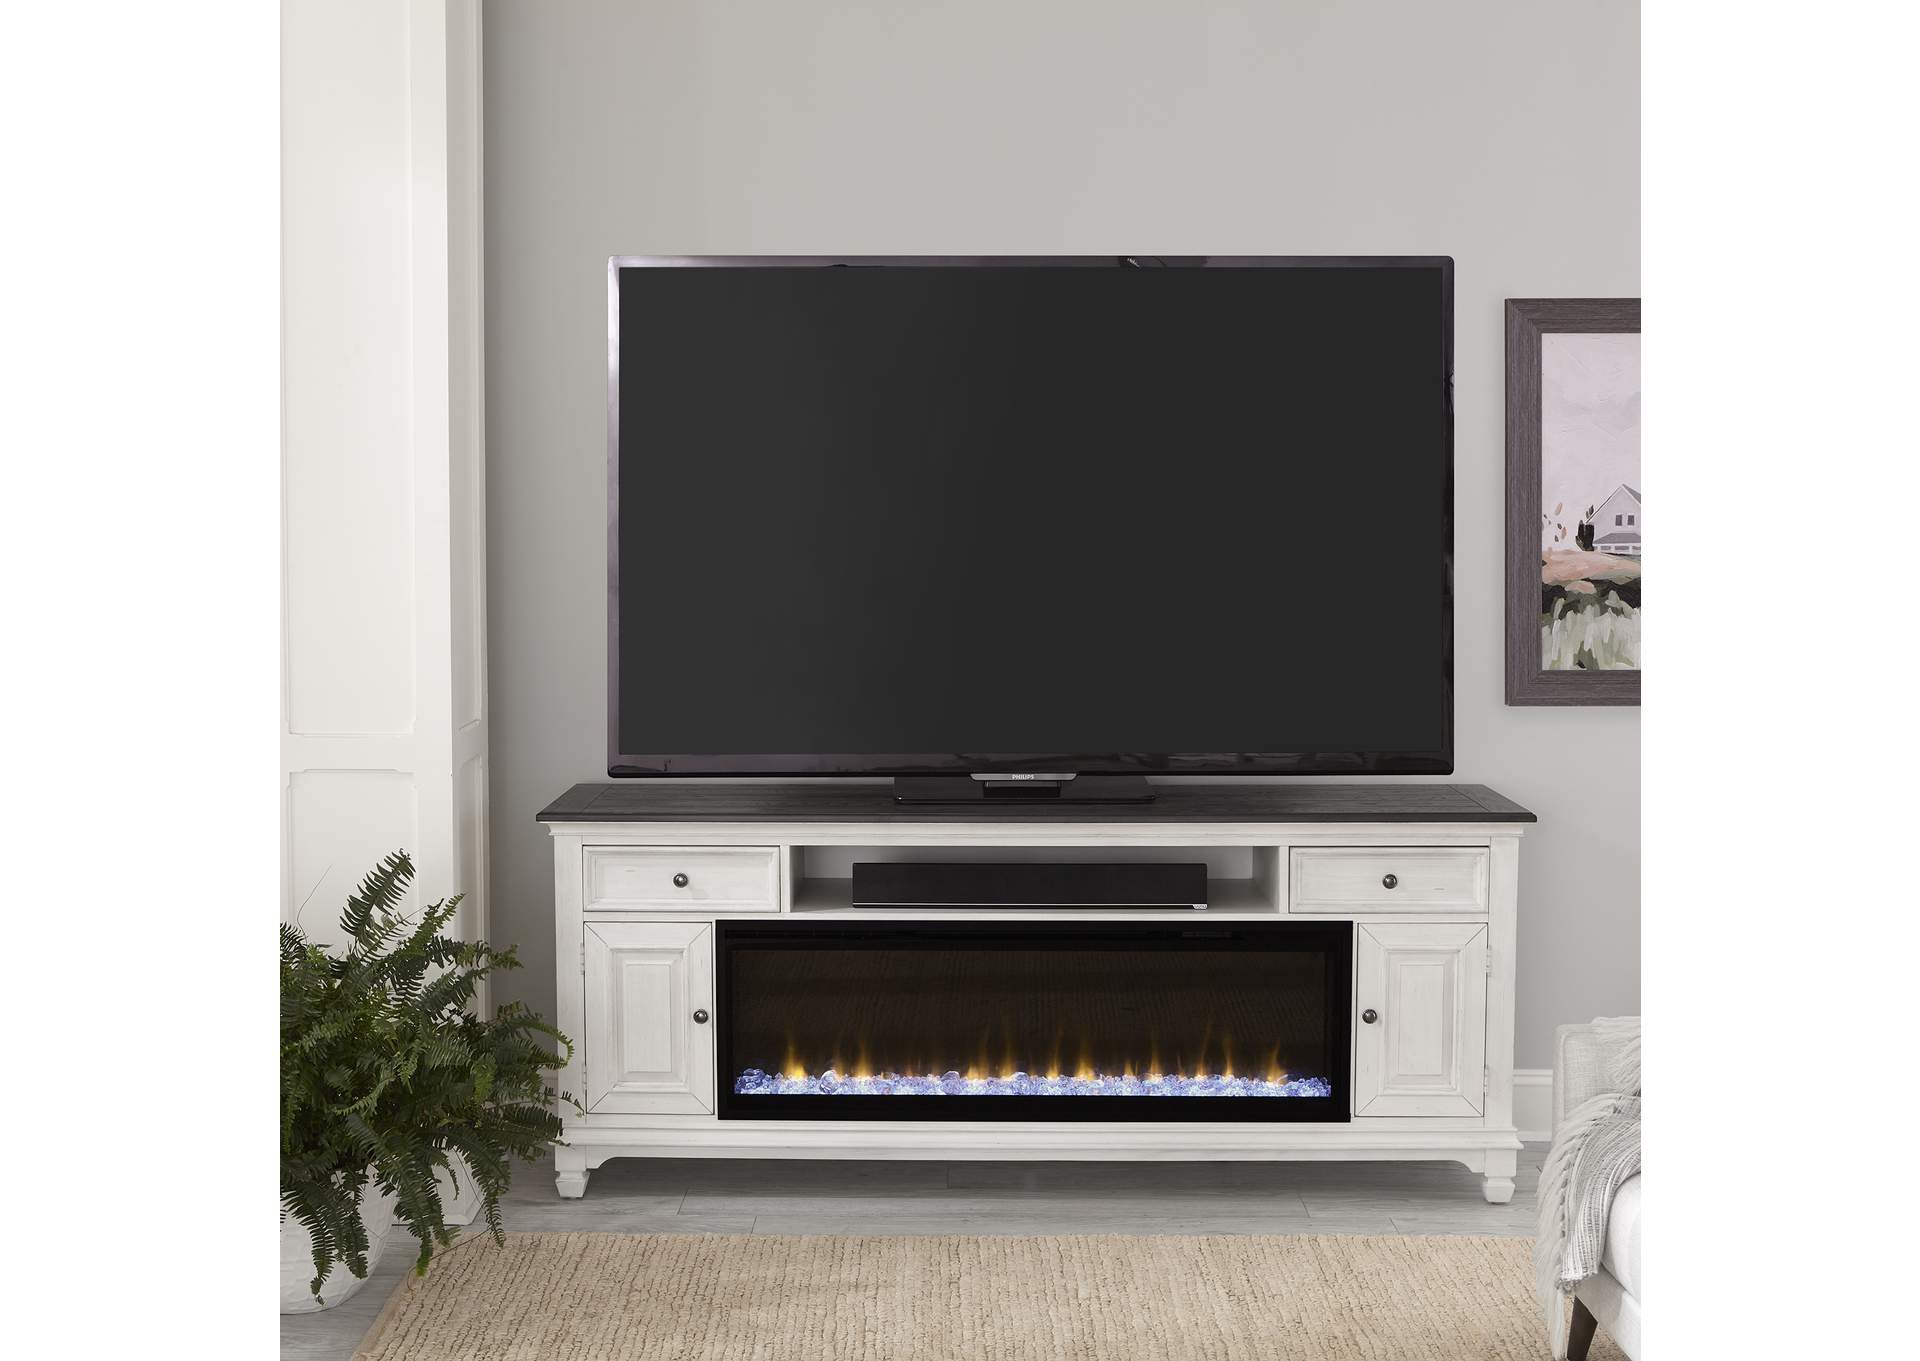 Fireplace TV Consoles 80 Inch Fireplace TV Console,Liberty